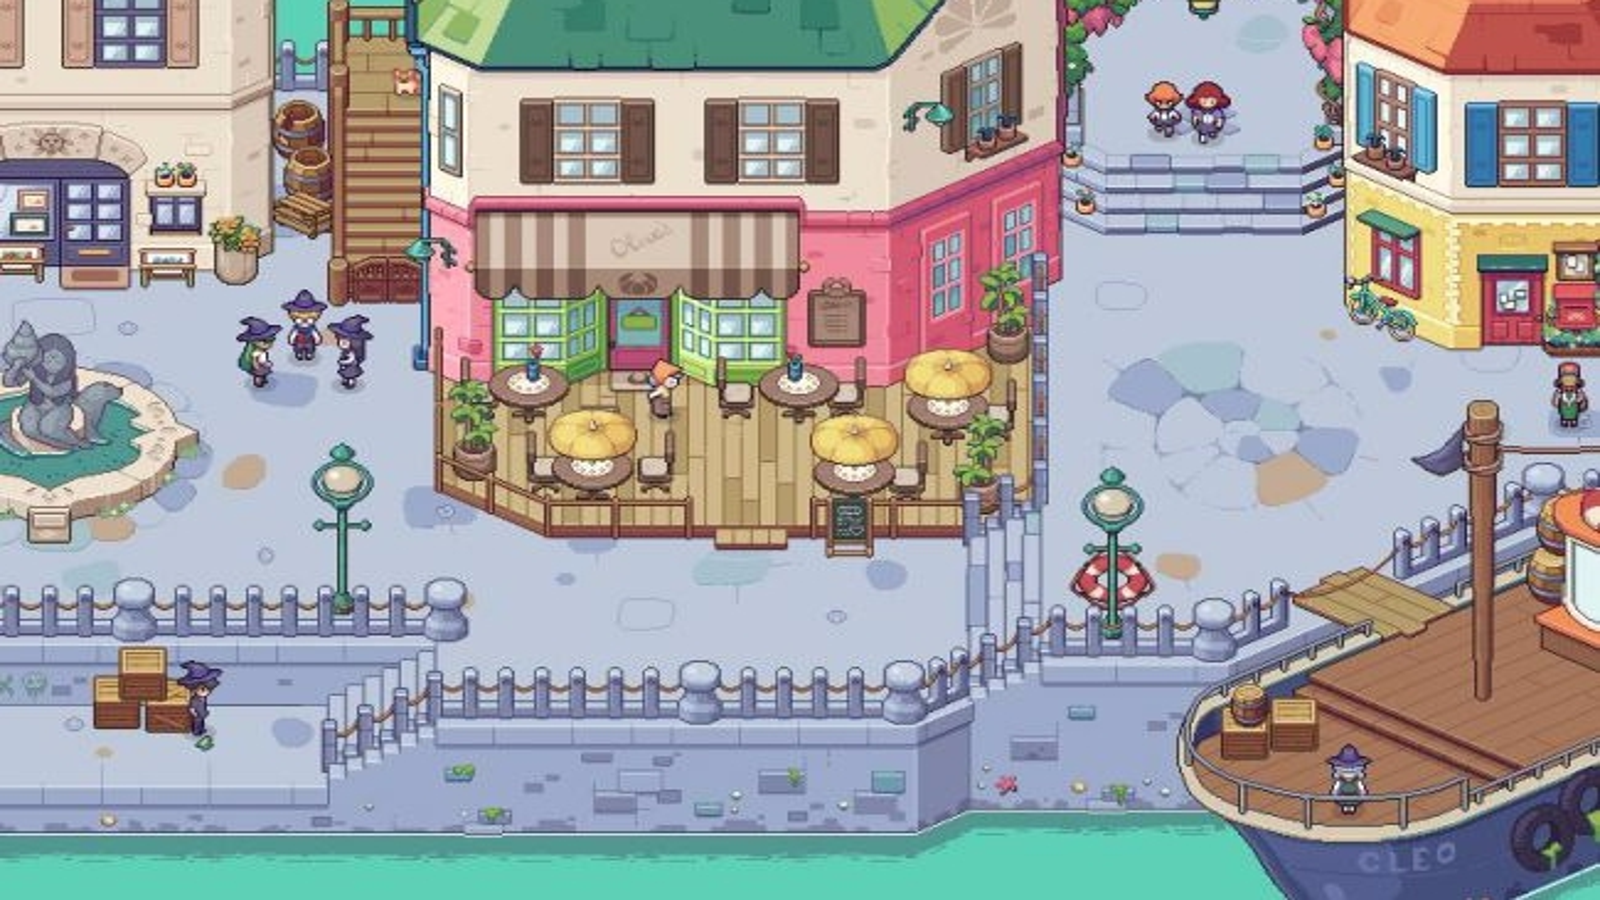 Delightful farming RPG 'Stardew Valley' is coming to iOS